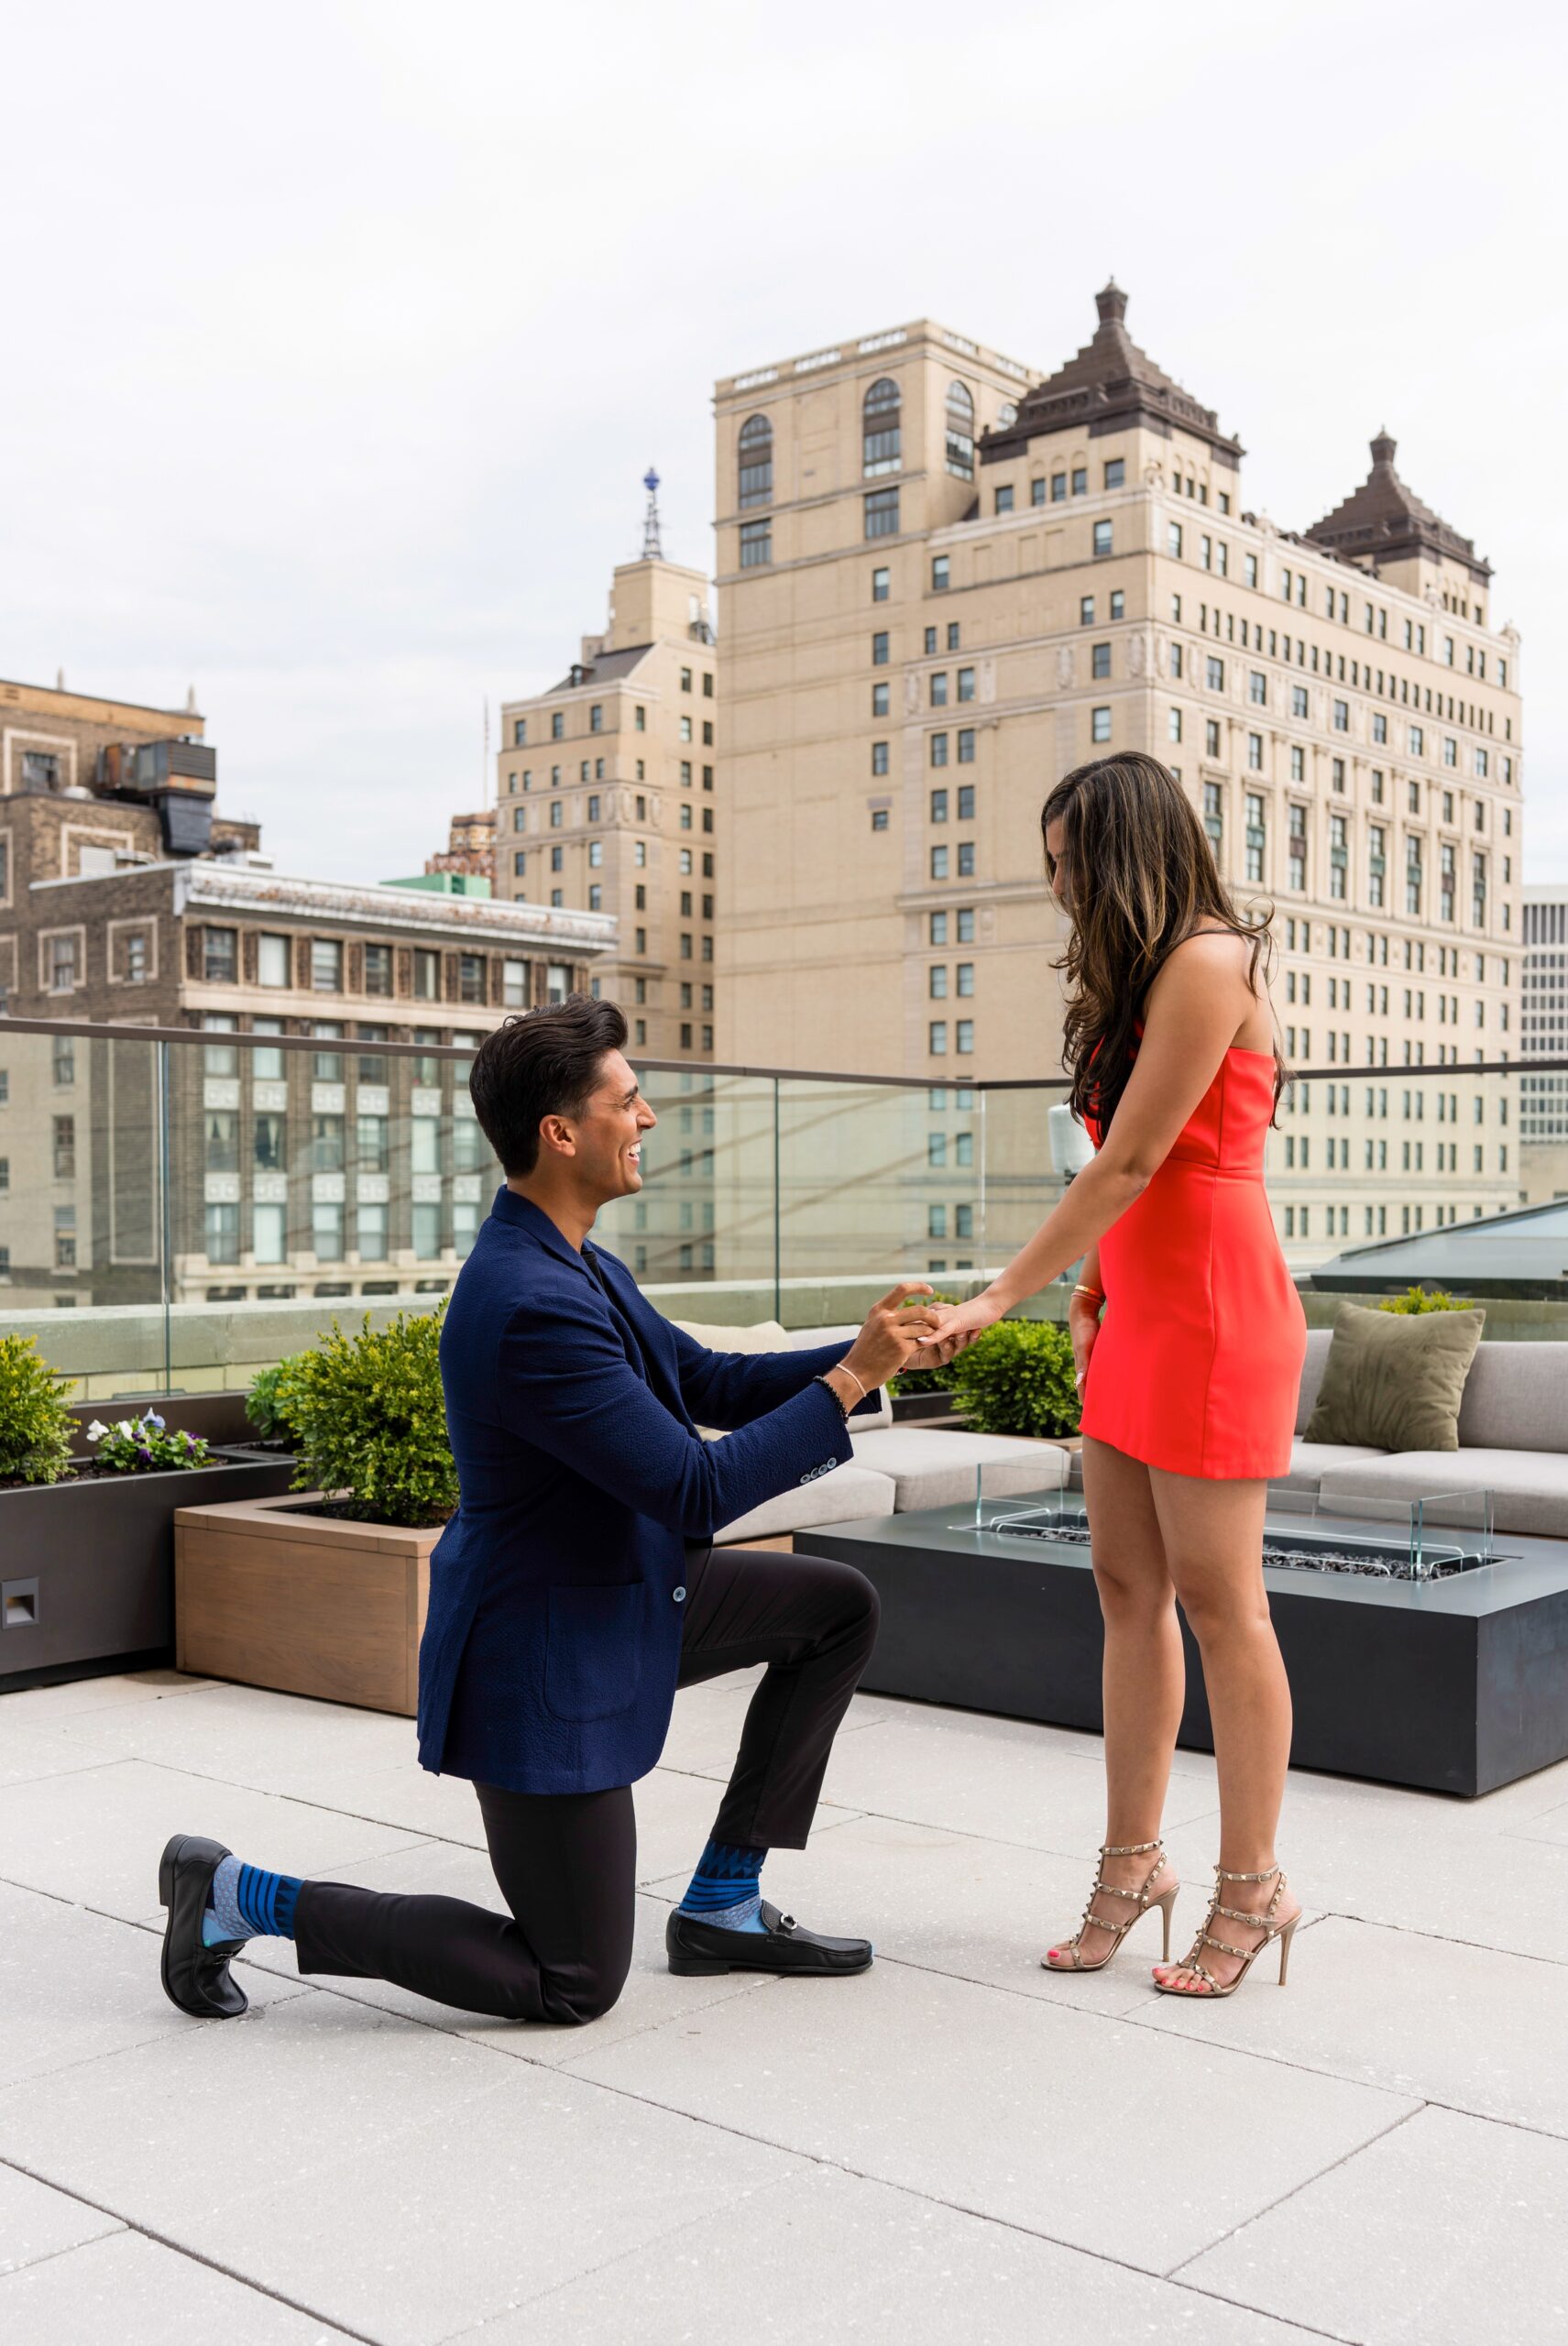 A gentleman takes a knee and places and engagement ring on his fiancé's hand during their Kamper's Rooftop Proposal atop the Book Tower in Detroit.  